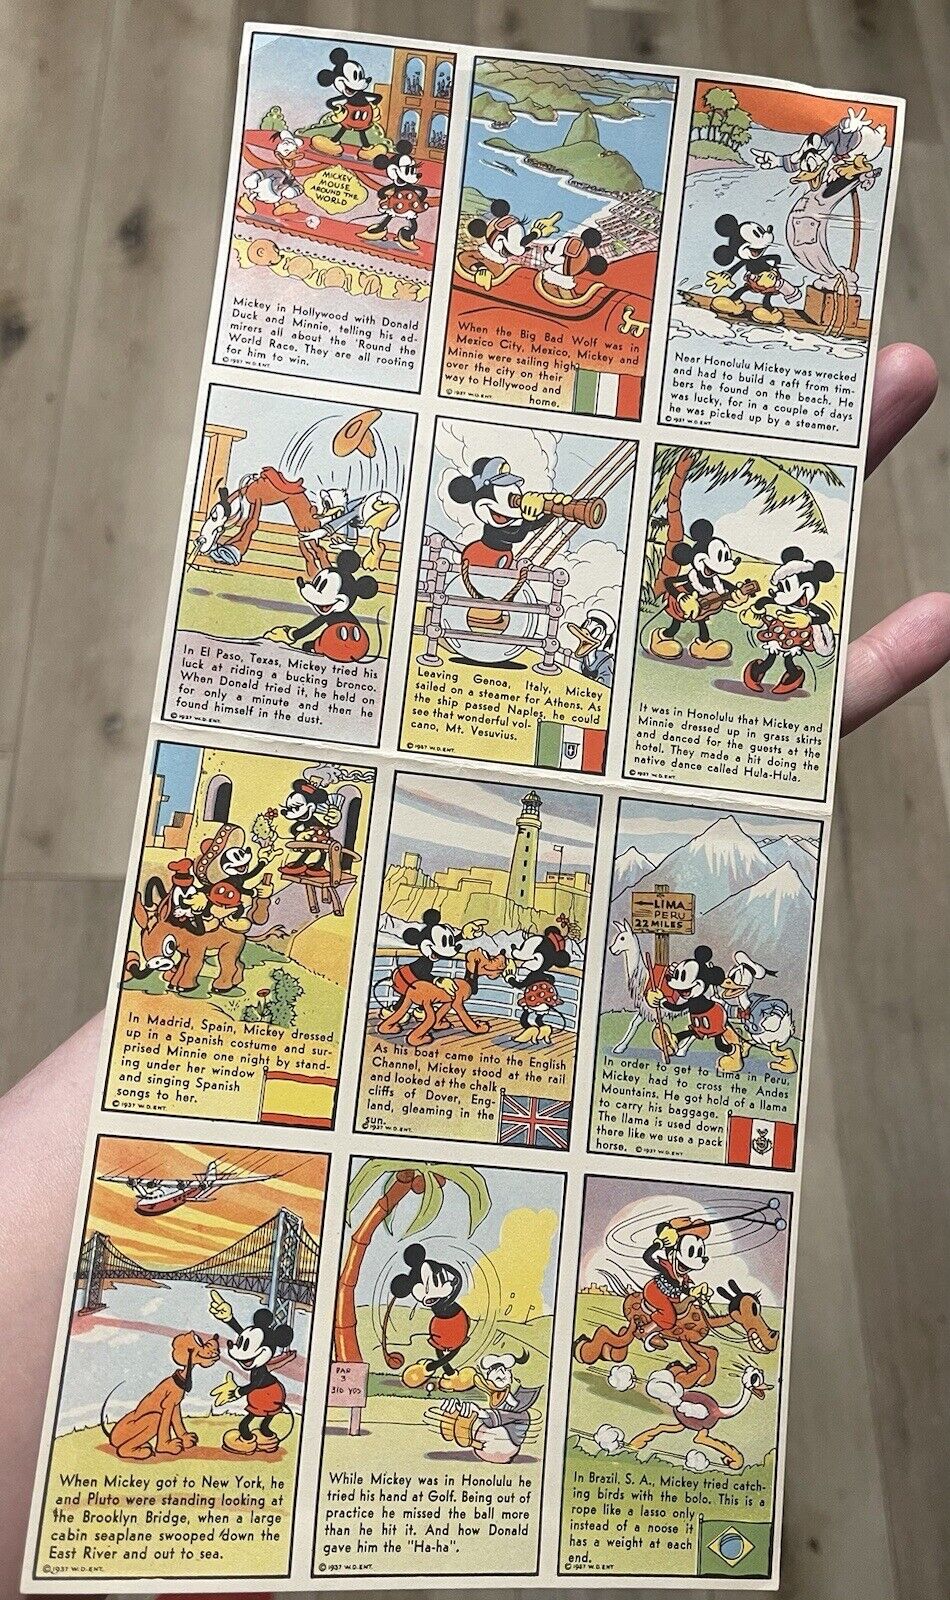 1937 MICKEY MOUSE UNCUT SHEET OF 12 BREAD CARDS WALT DISNEY MAP RARE CONDITION